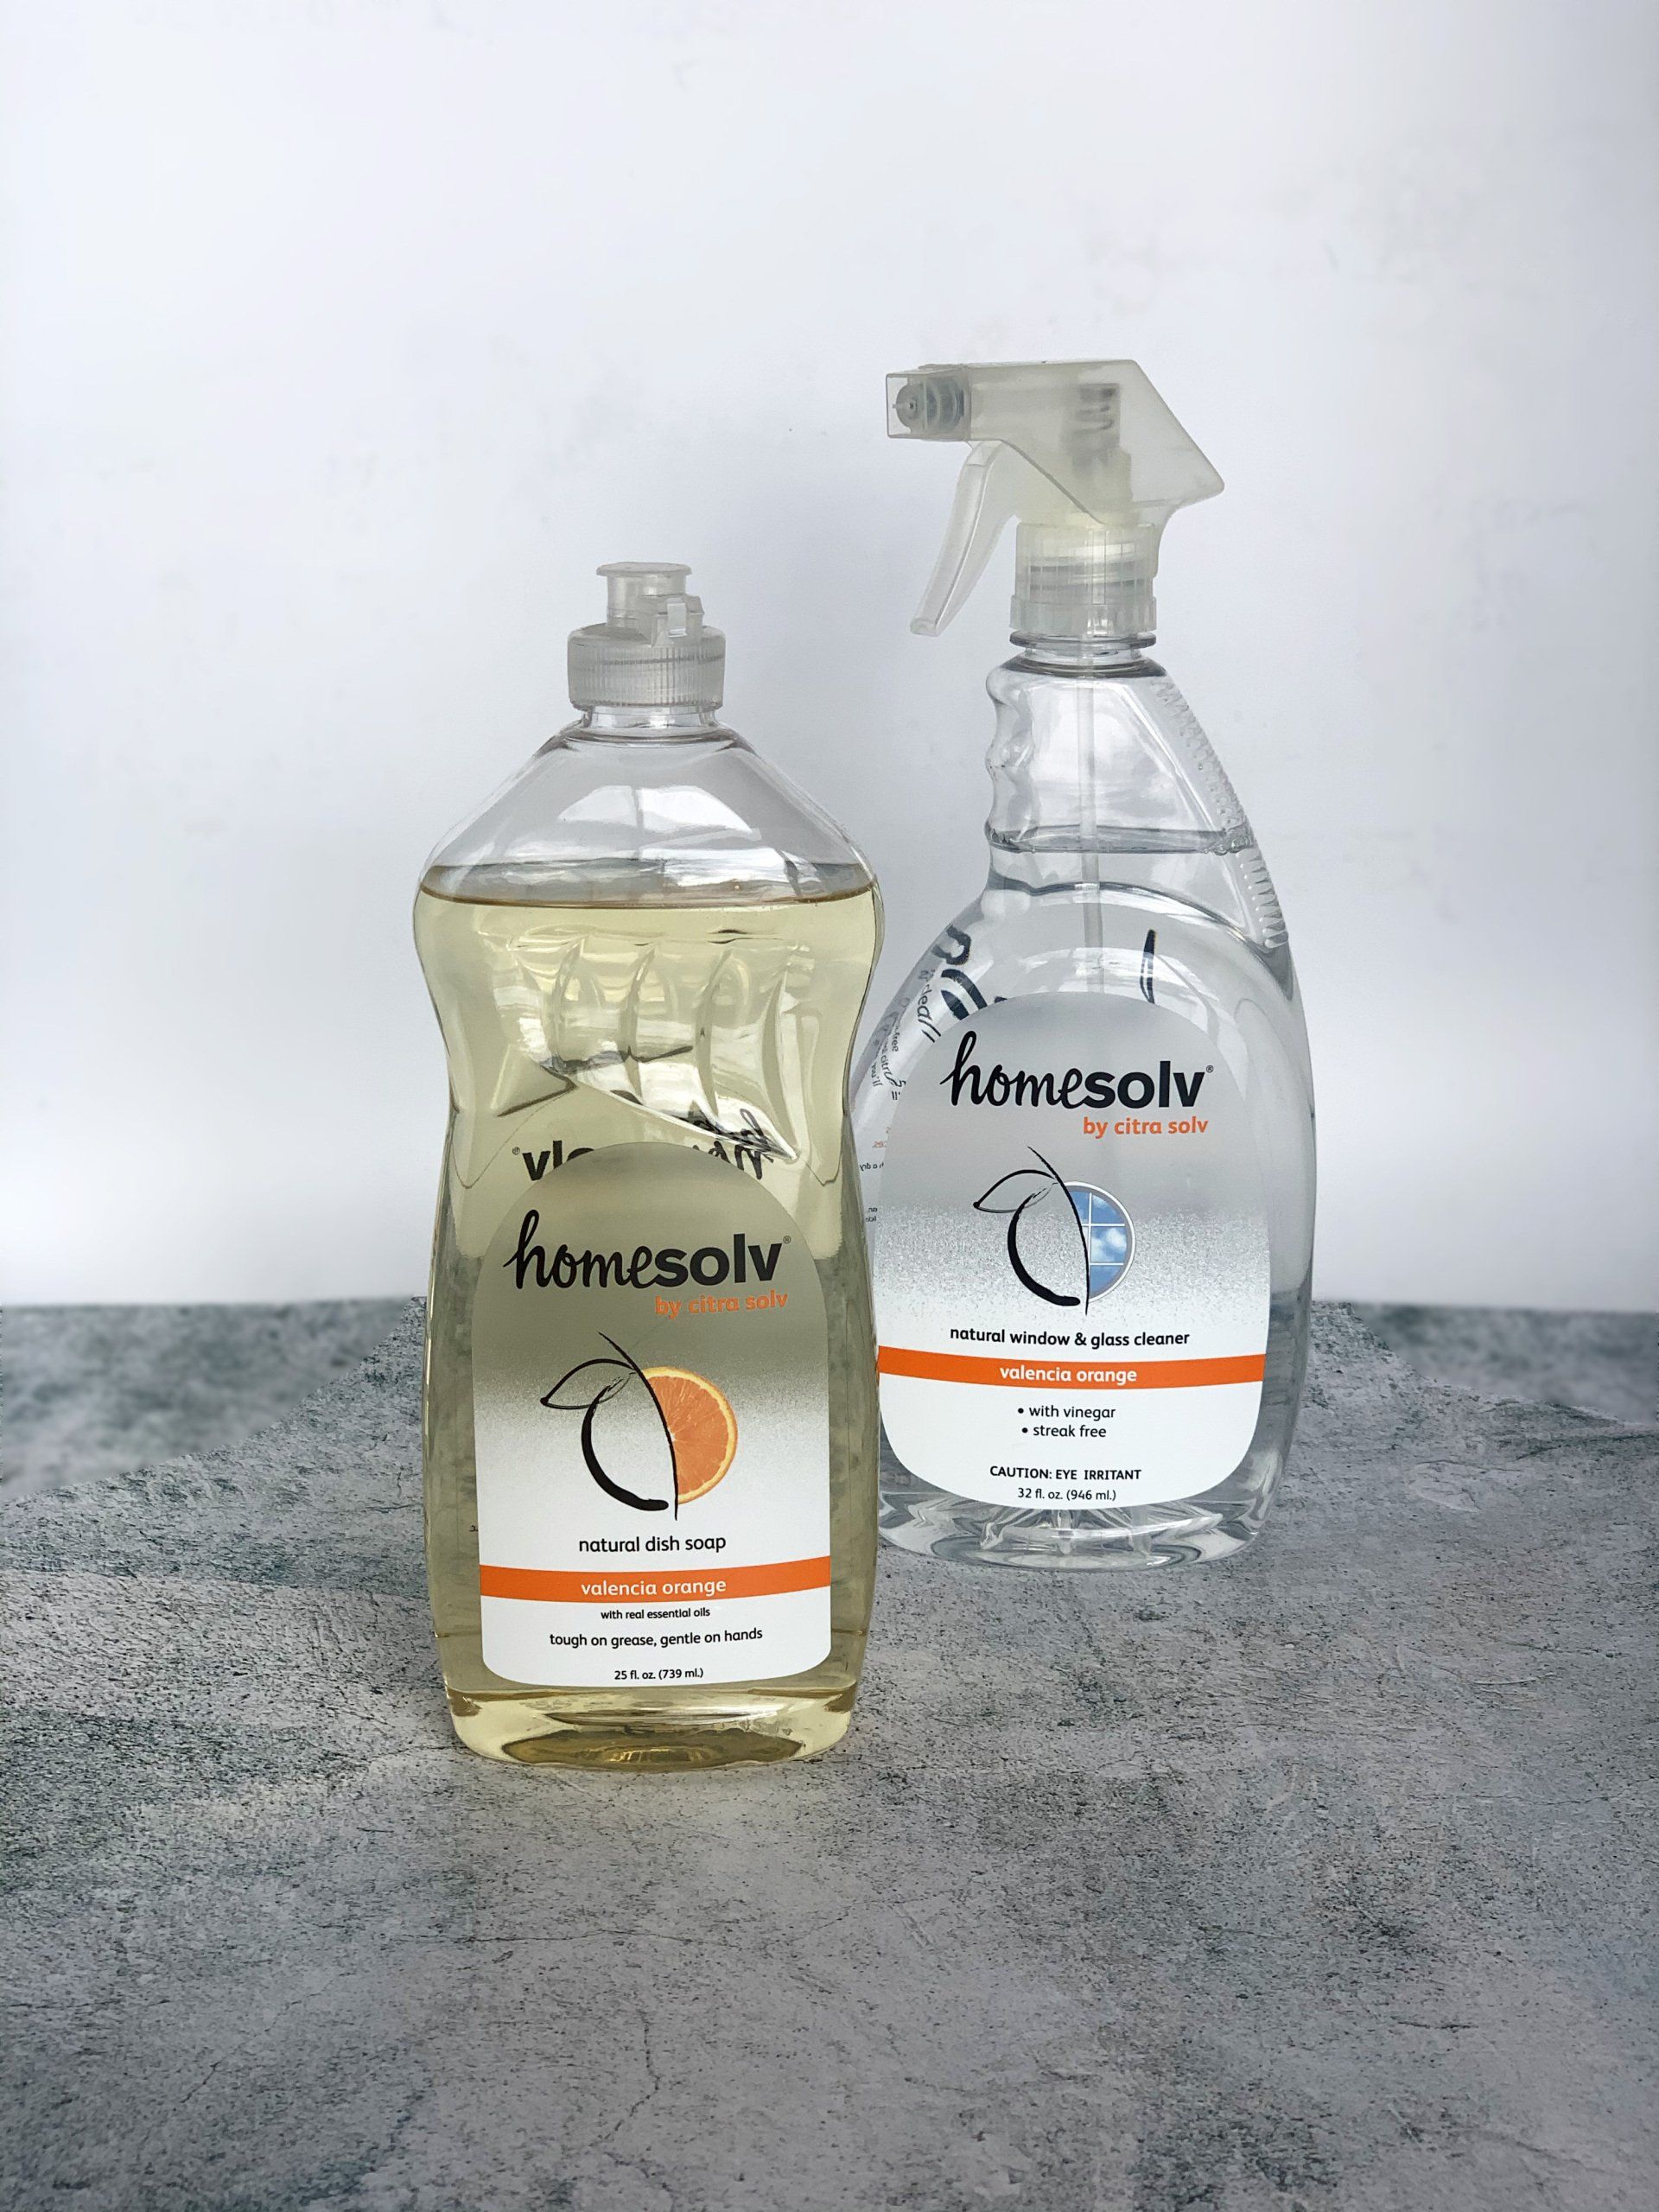 Homesolv products